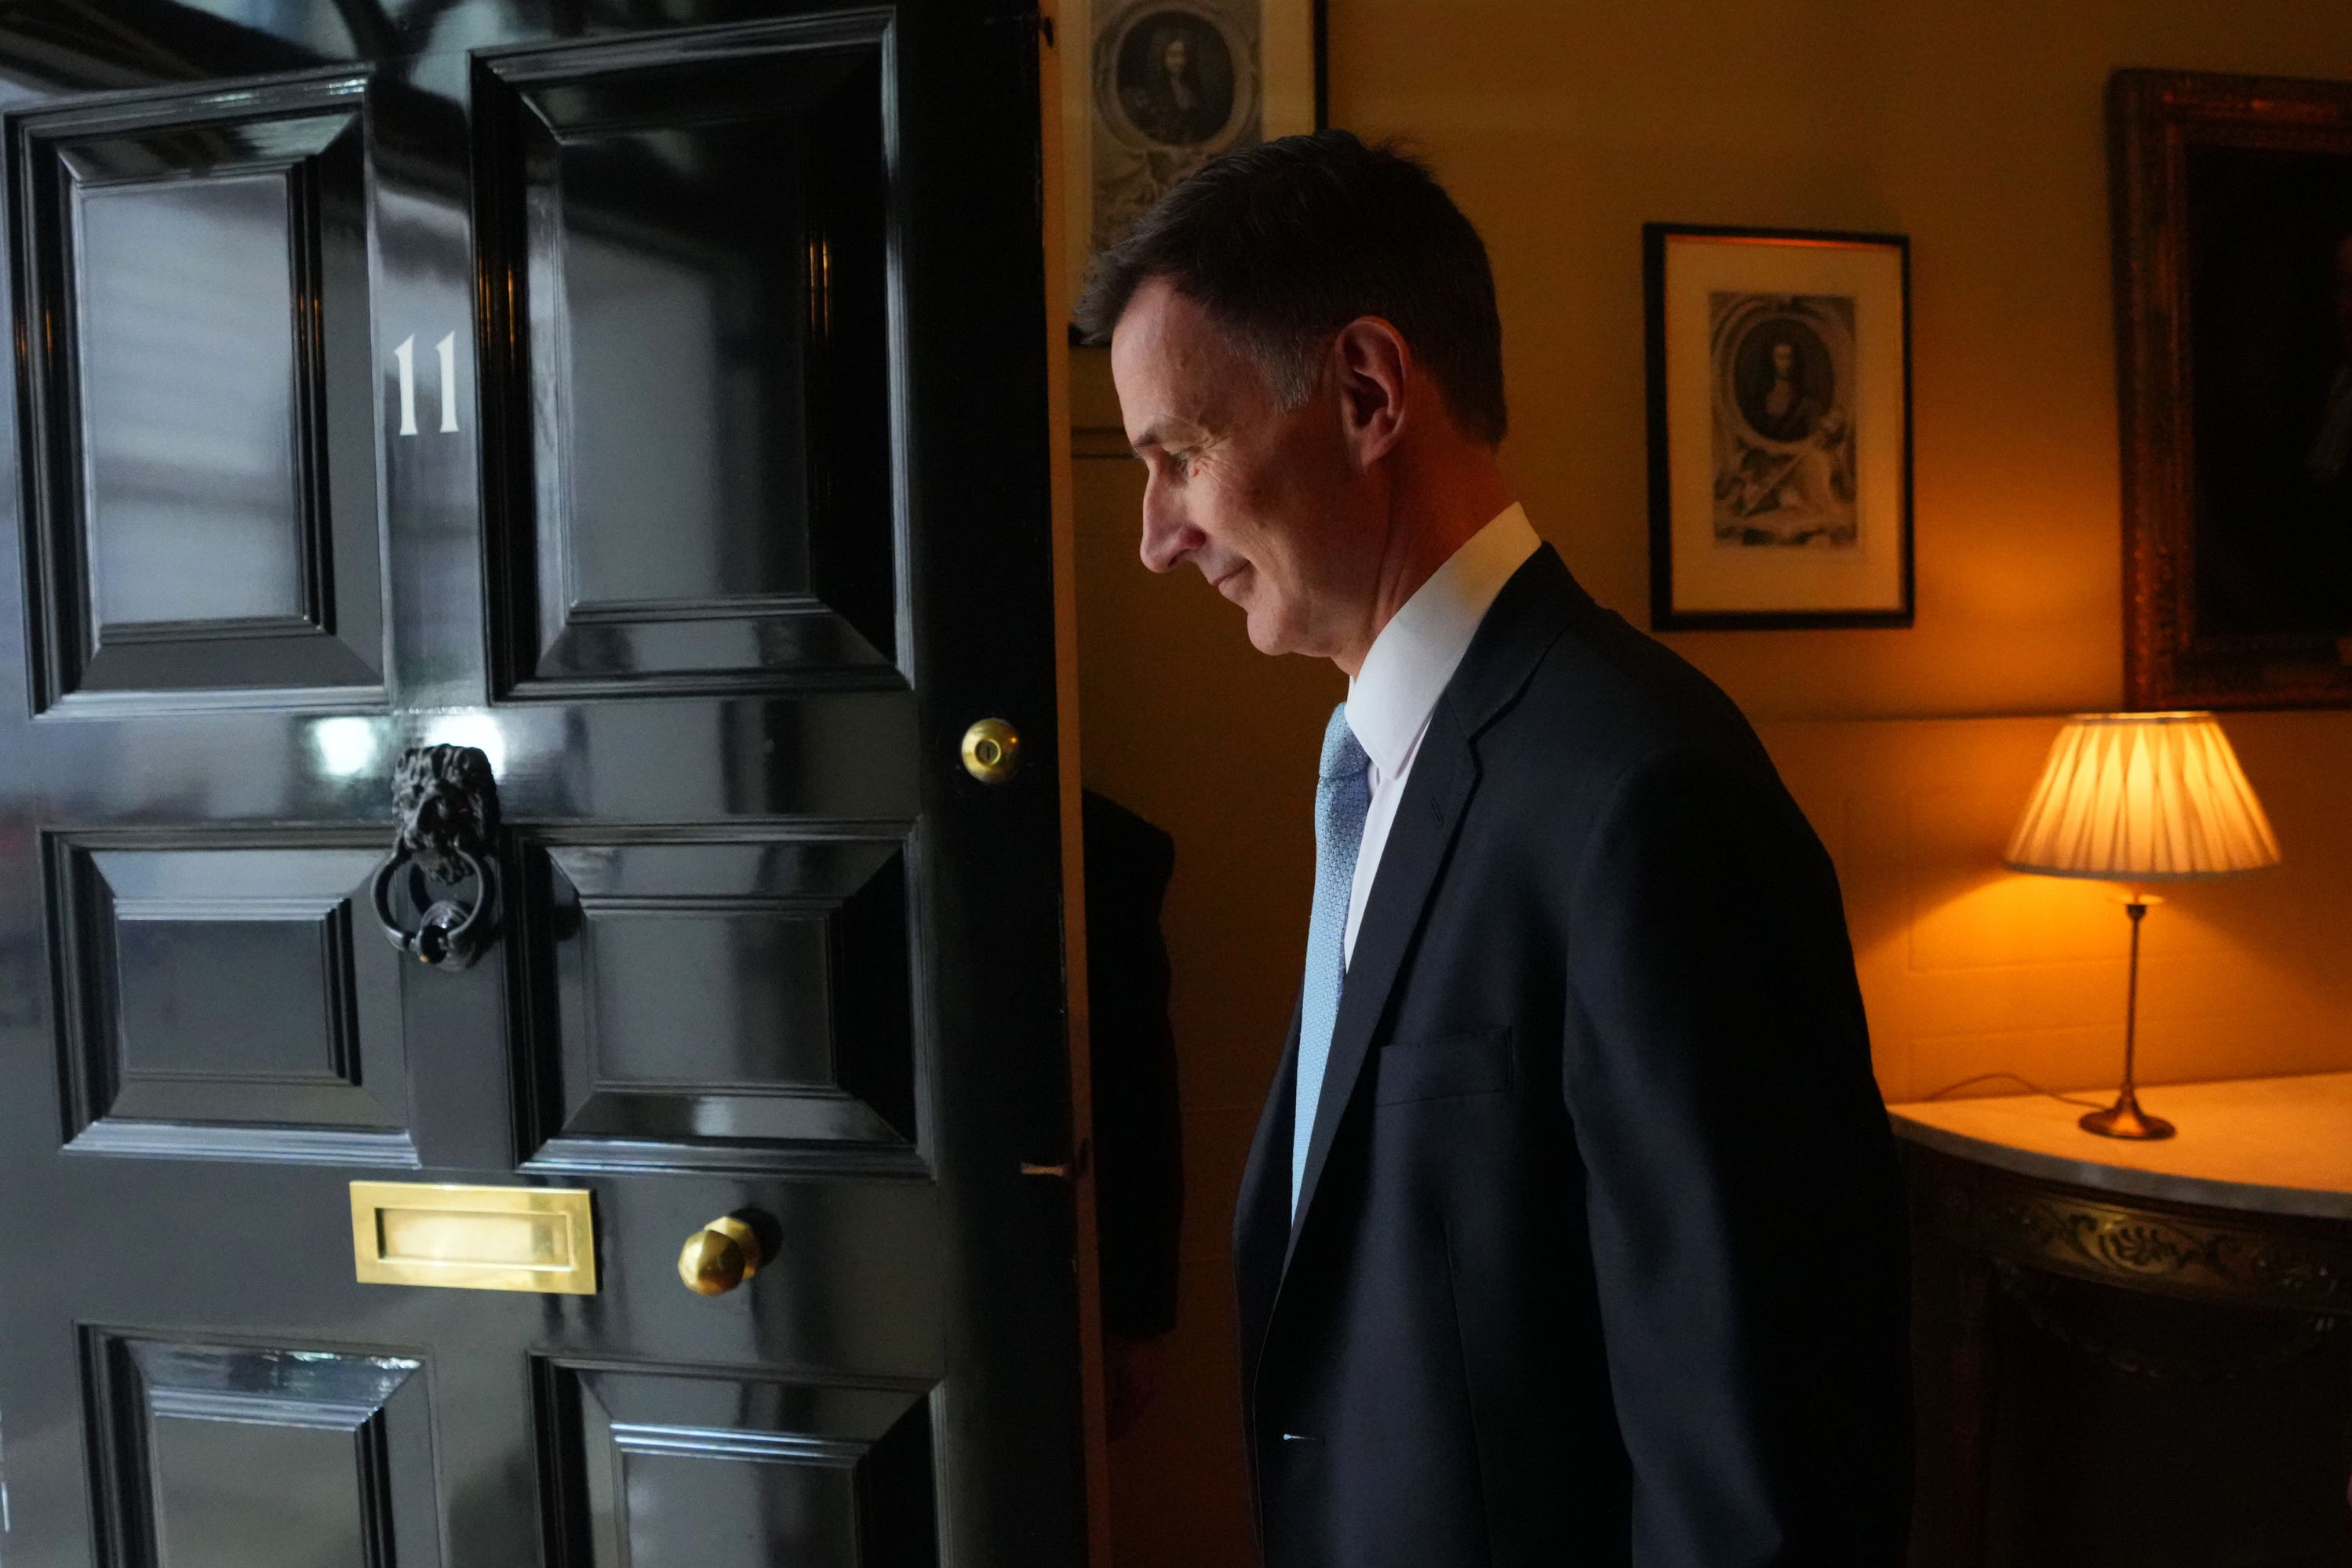 Chancellor of the Exchequer Jeremy Hunt exits 11 Downing Street ahead of delivering his Budget (Carl Court/PA)